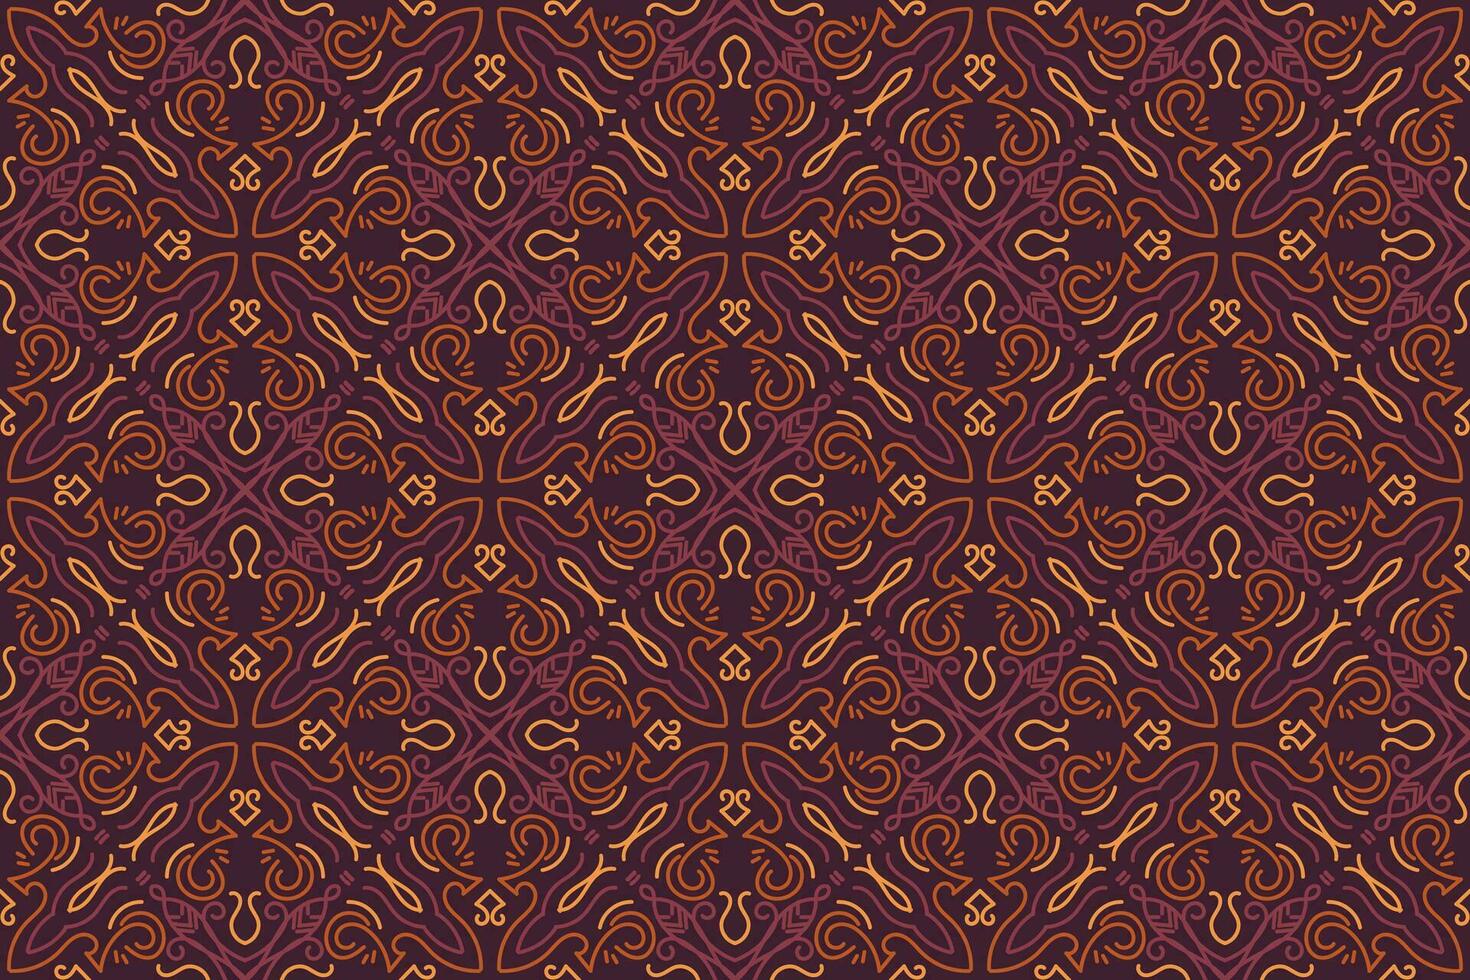 arabic pattern. purple and orange background with Arabic ornaments. Patterns, backgrounds and wallpapers for your design. Textile ornament. Vector illustration.